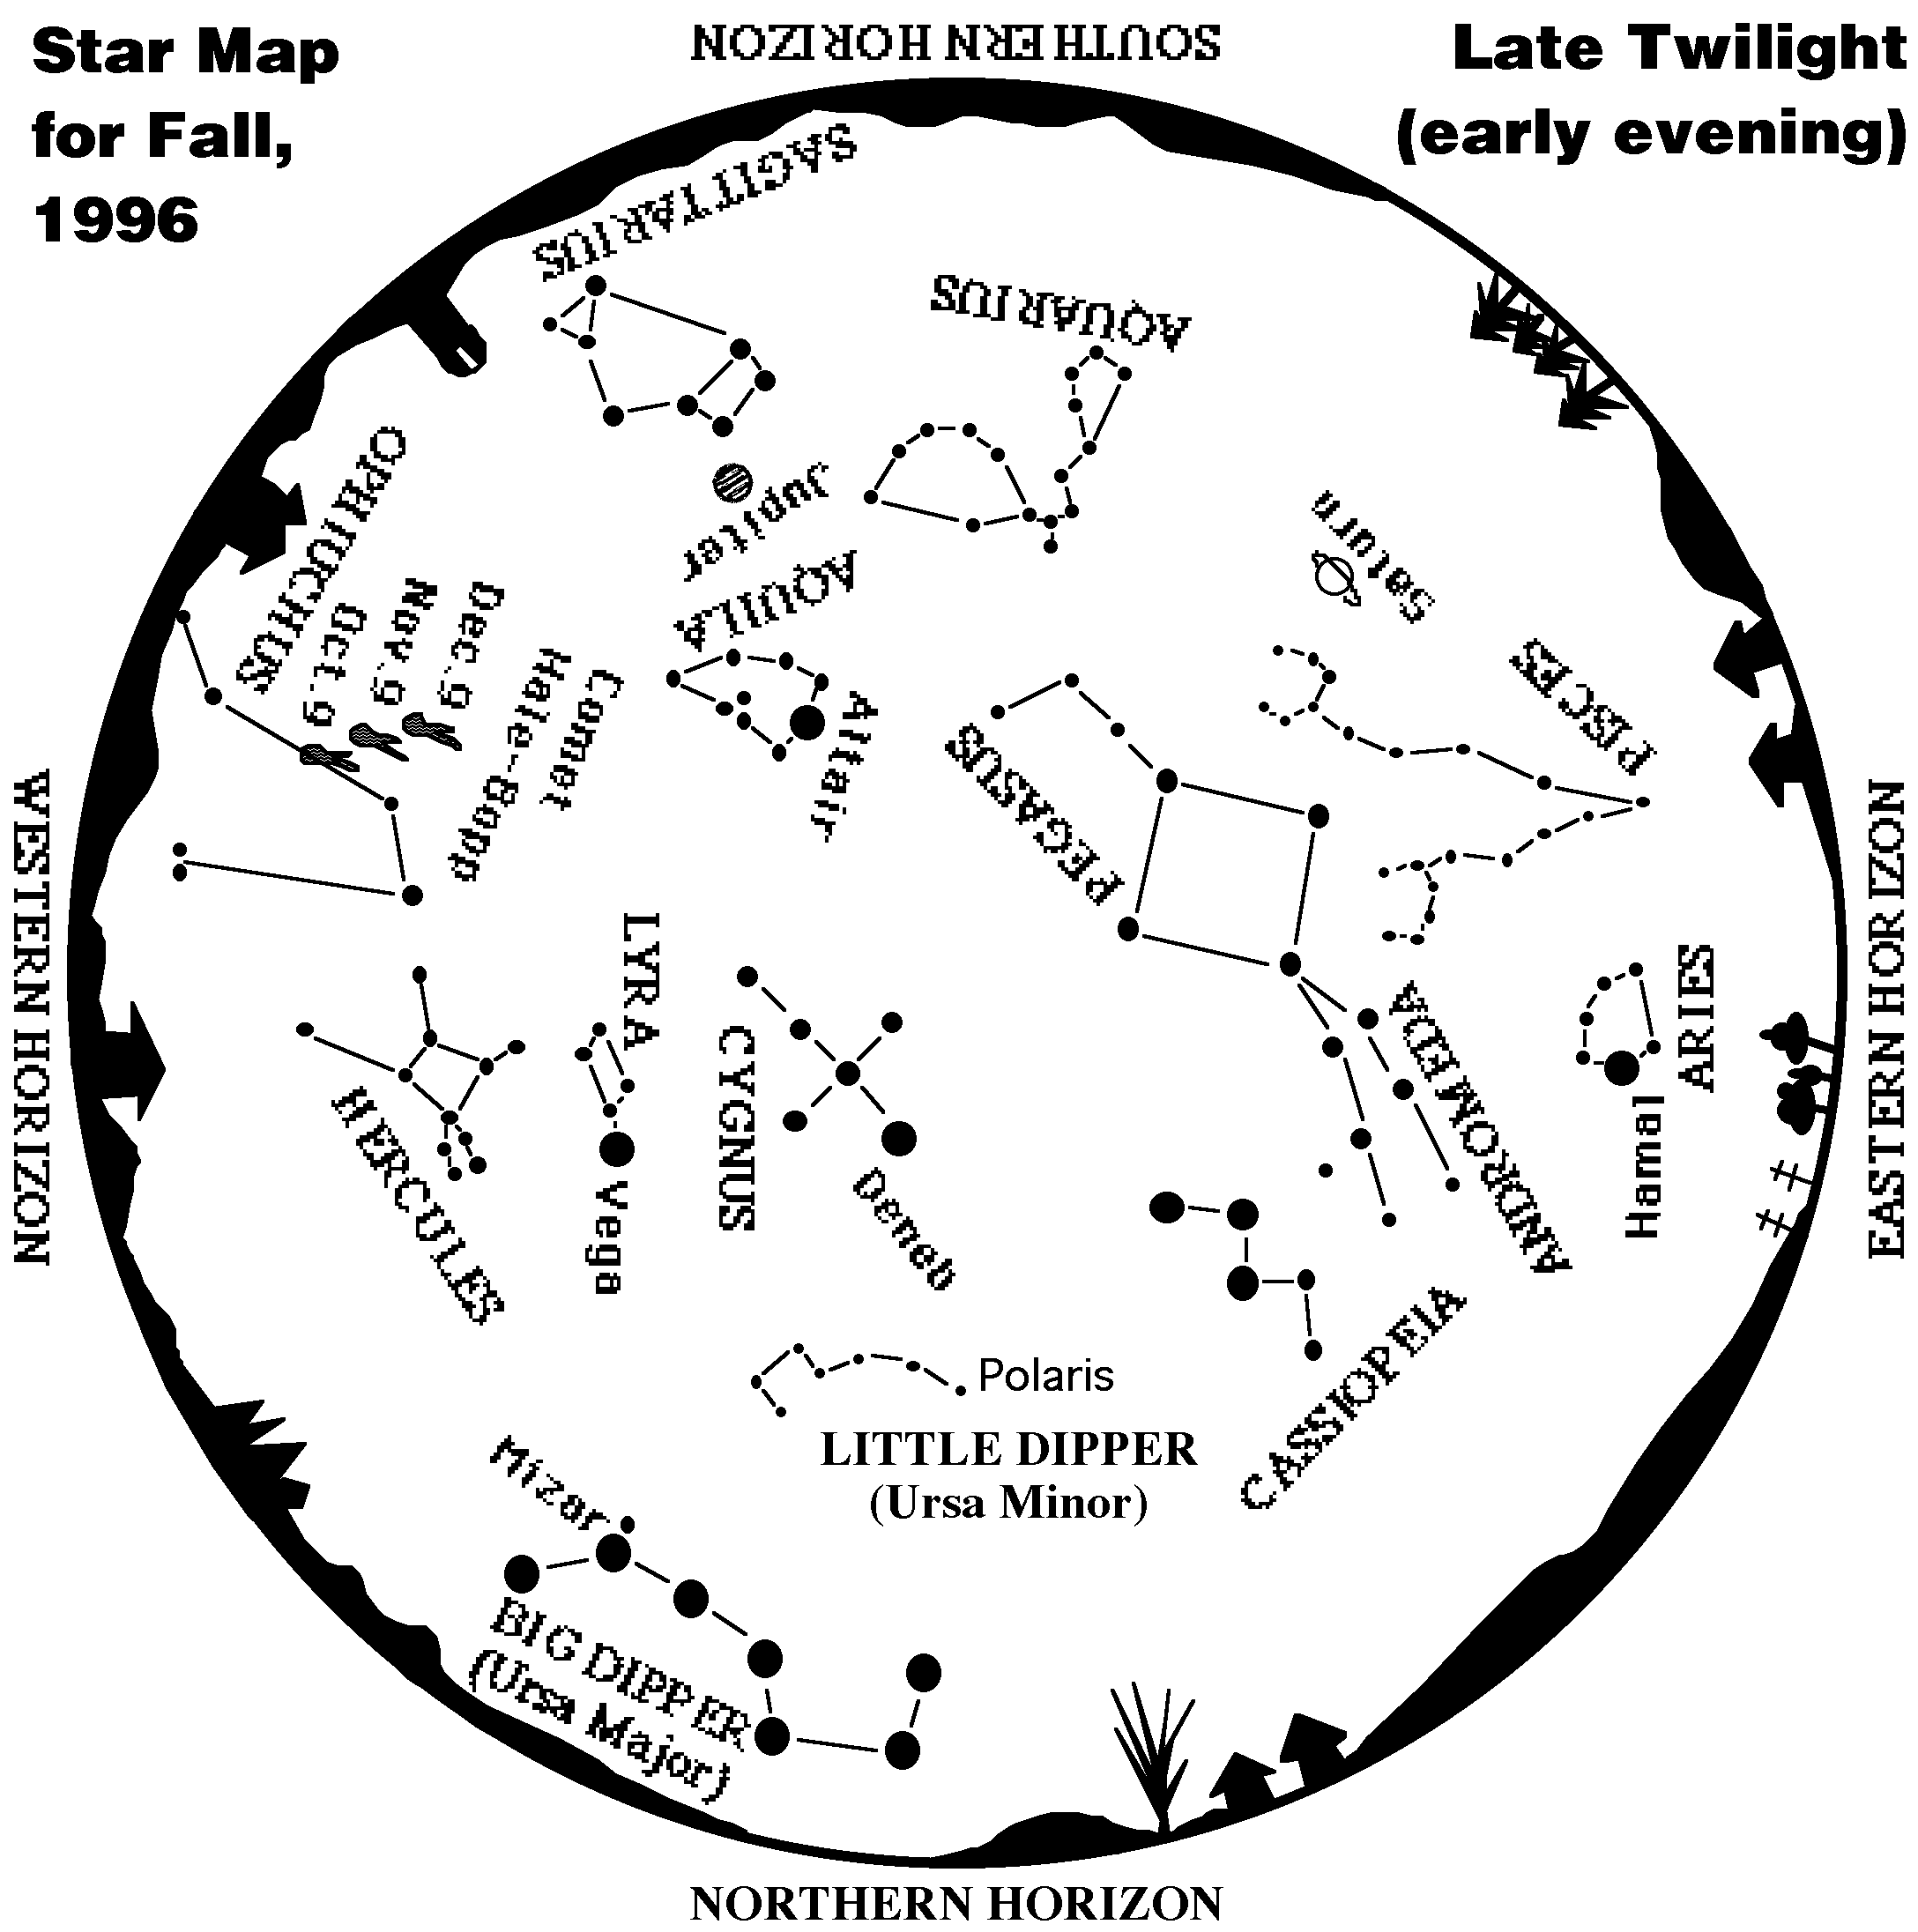 Star Map for Fall, 1996